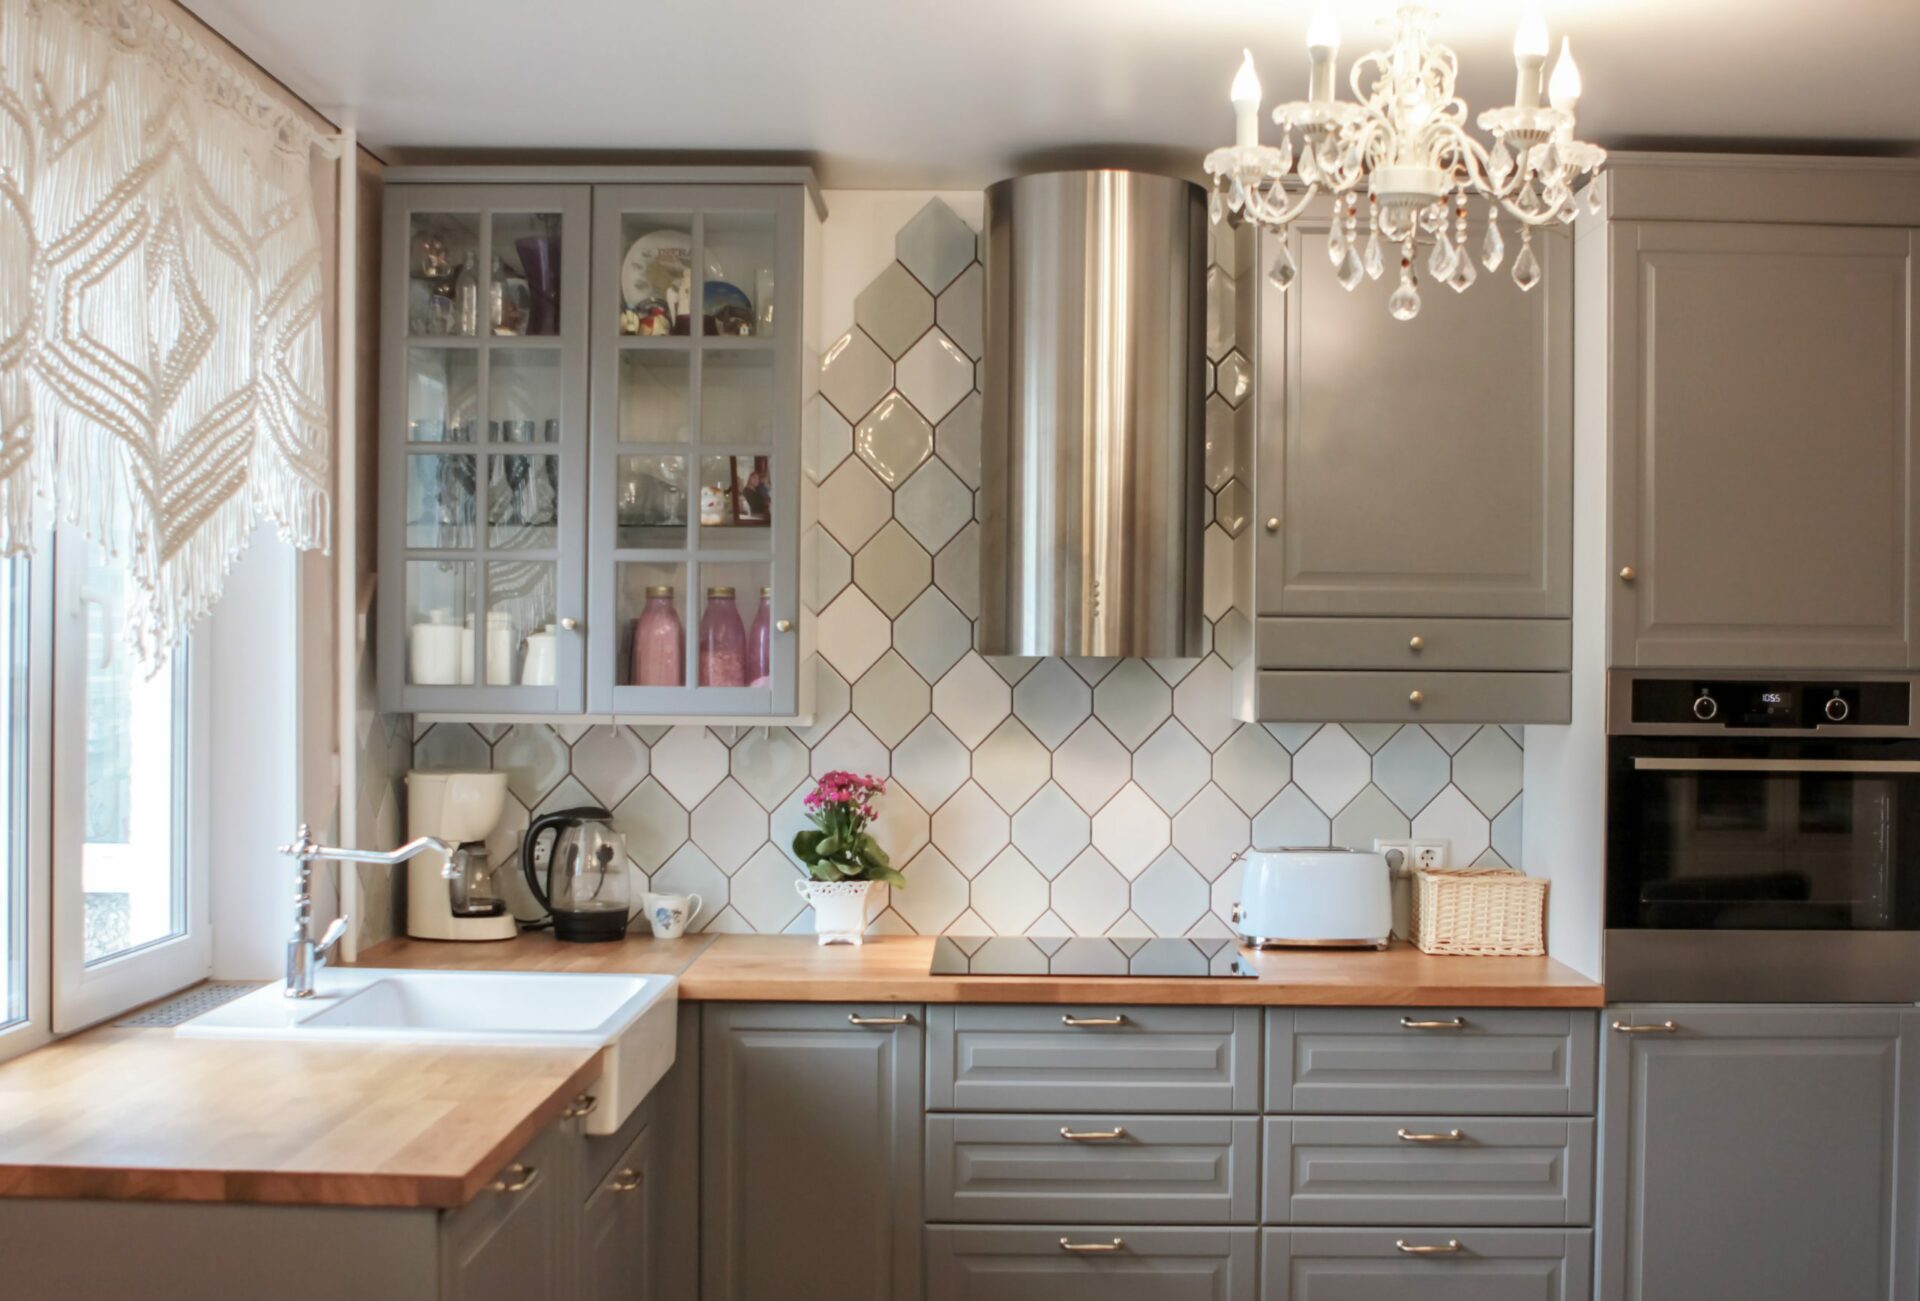 Does Your Kitchen Need a Facelift?